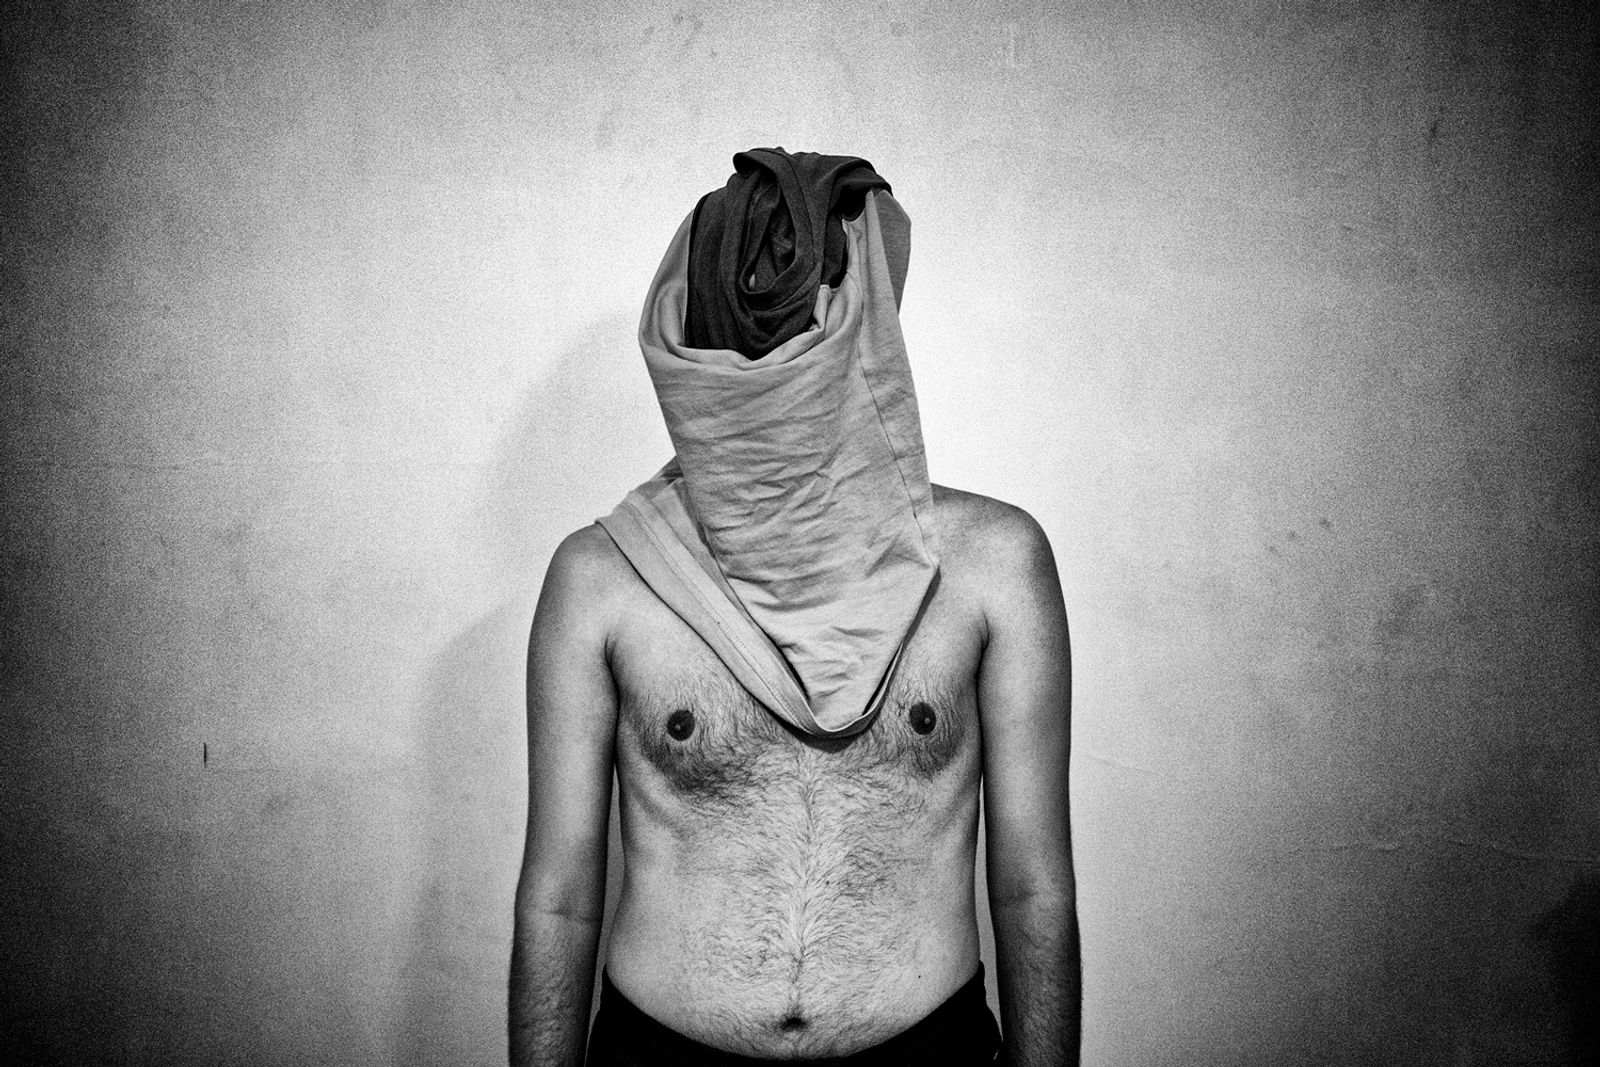 © Farshid Tighehsaz - Fear of naked body and gender issues hanging on the minds of these generations.